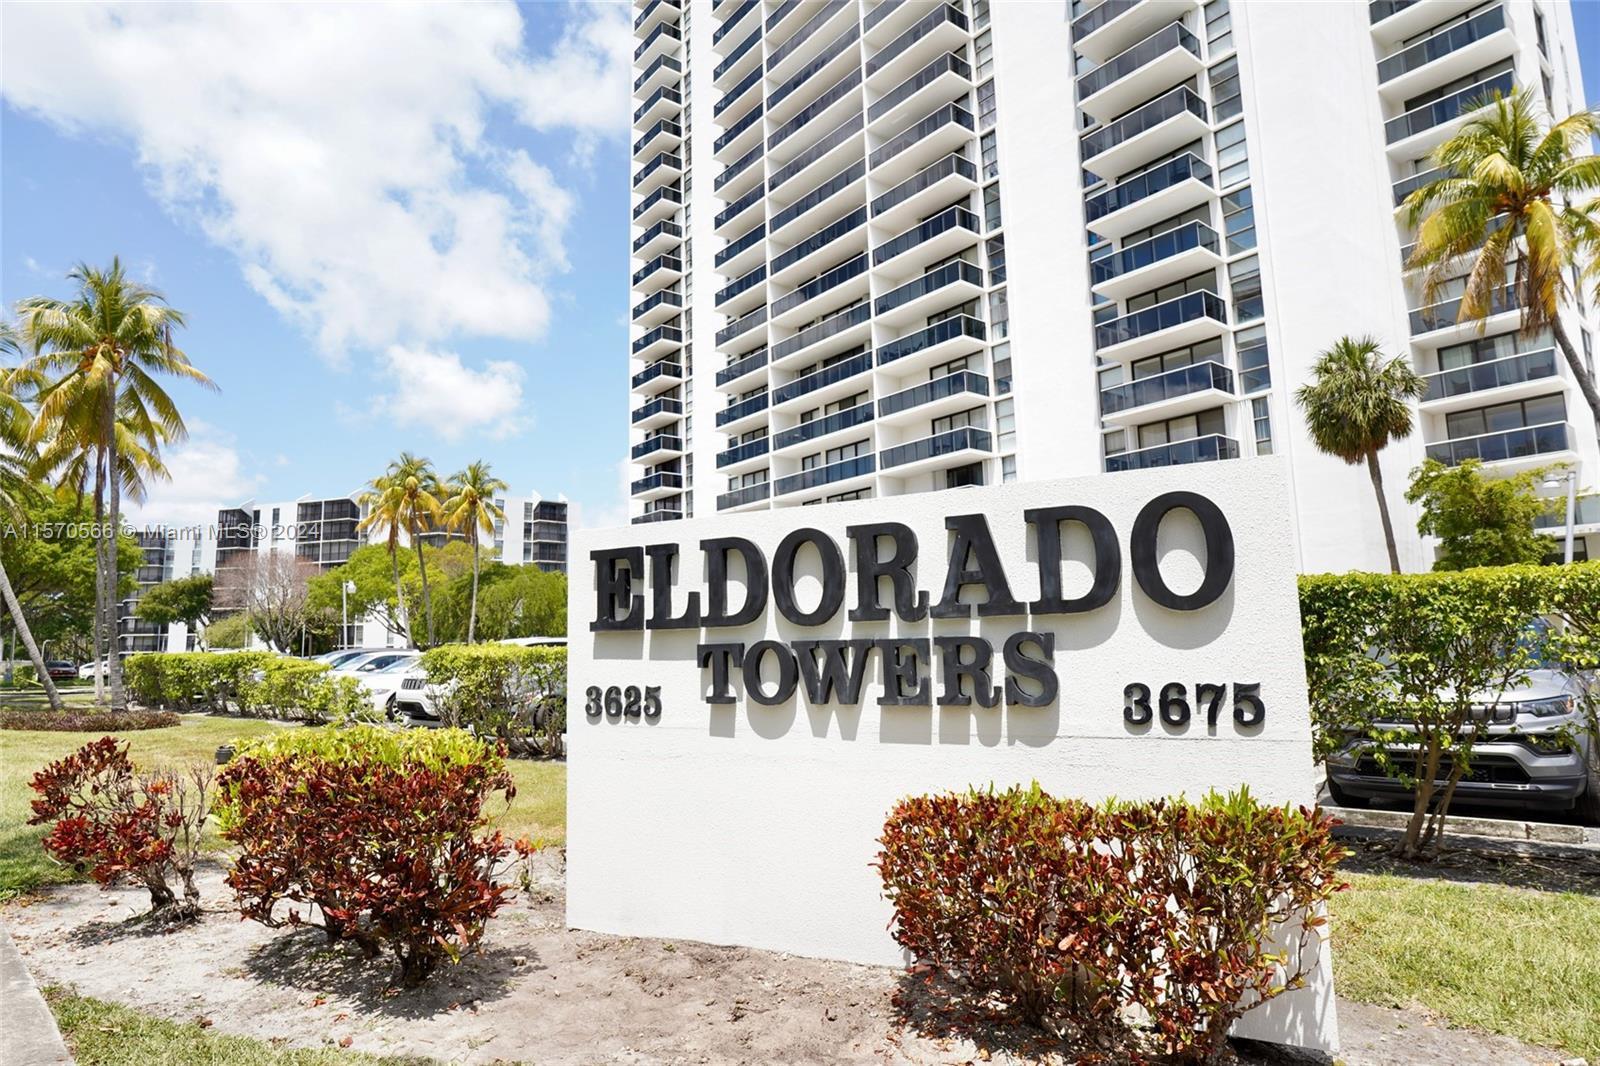 Welcome to this wonderful furnished 2 bed, 1.5 bath located in the El Dorado condominium, situated i